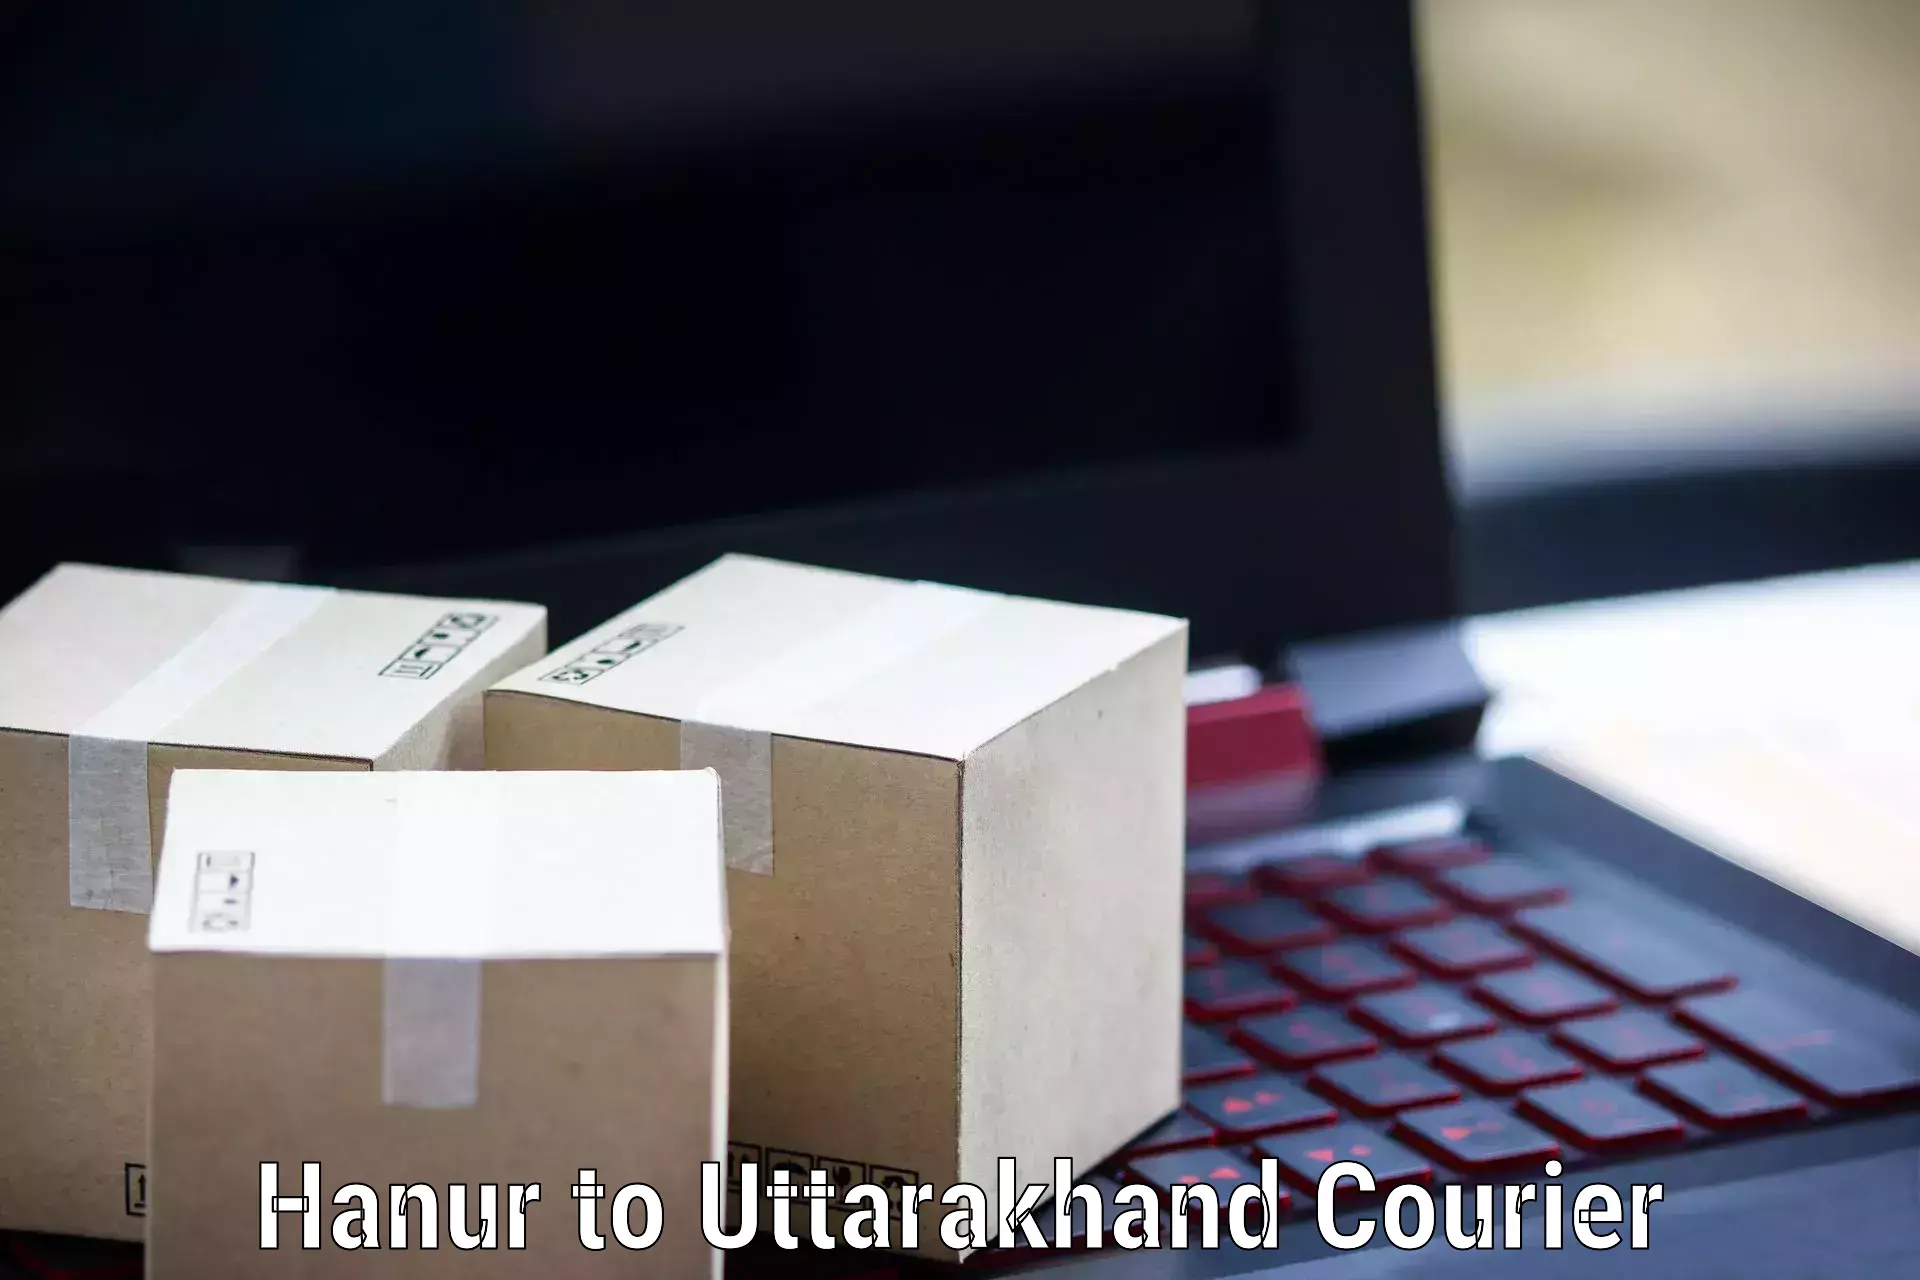 Parcel handling and care Hanur to Rishikesh